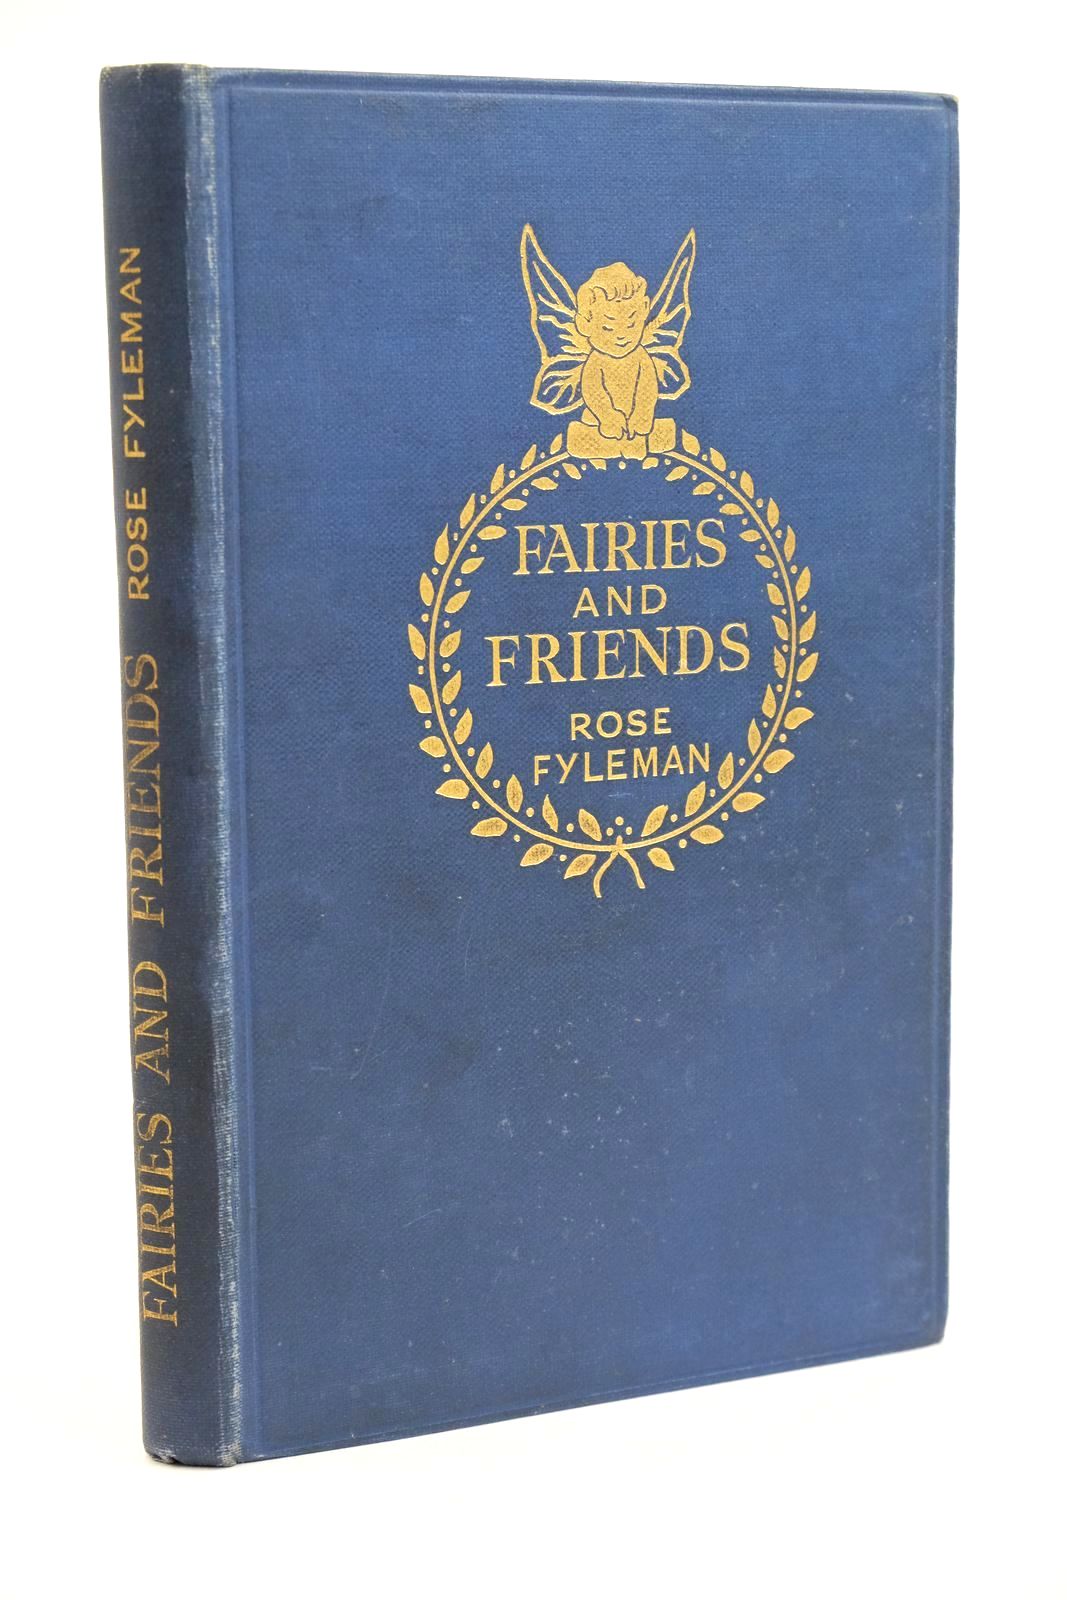 Photo of FAIRIES AND FRIENDS written by Fyleman, Rose published by Methuen & Co. Ltd. (STOCK CODE: 1323233)  for sale by Stella & Rose's Books